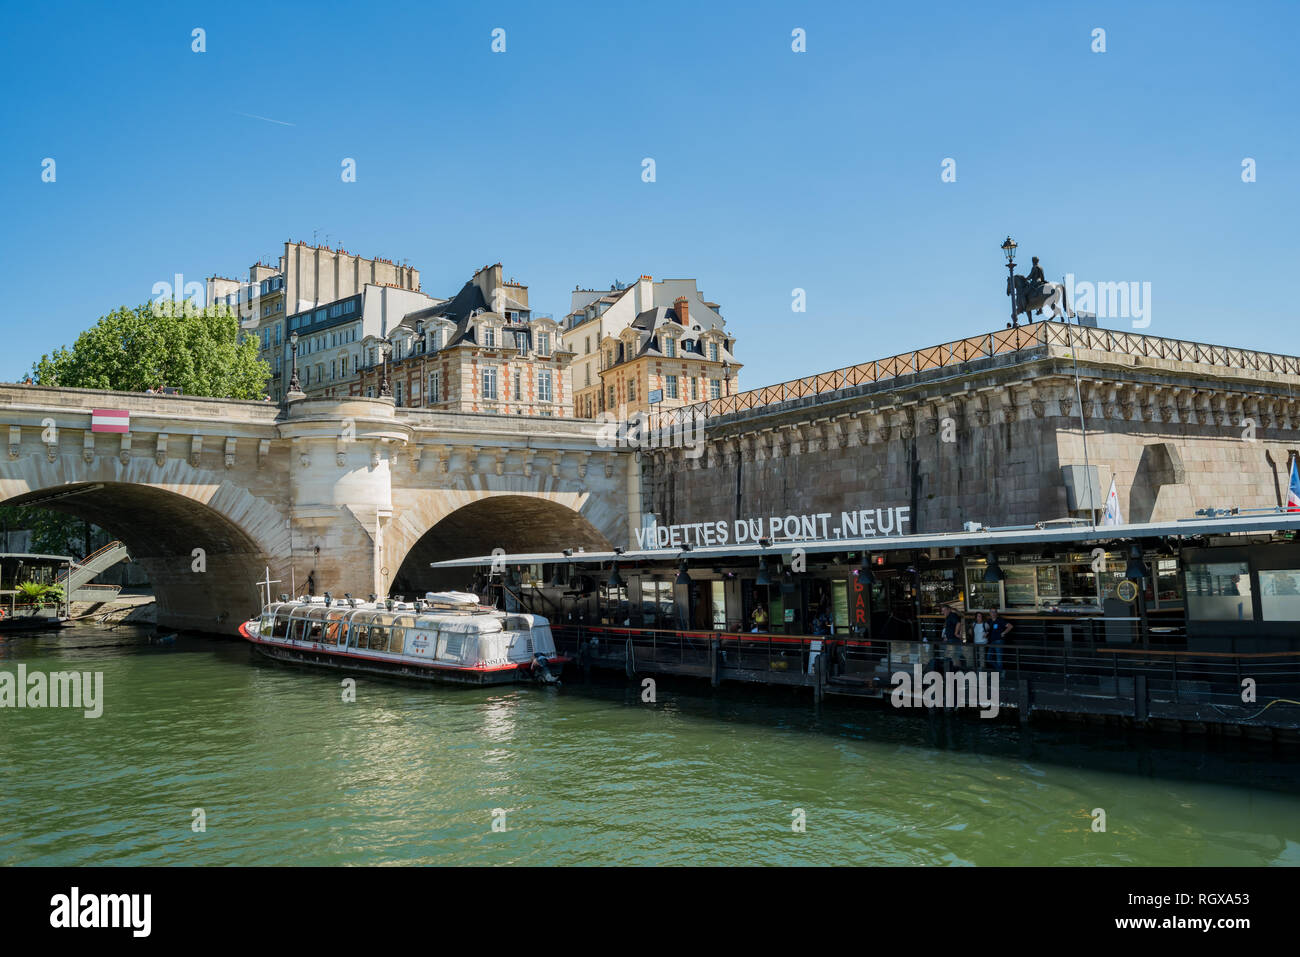 Paris, MAY 7: Vedettes Du Pont Neuf harbor by the Seine river on MAY 7, 2018 at Paris, France Stock Photo